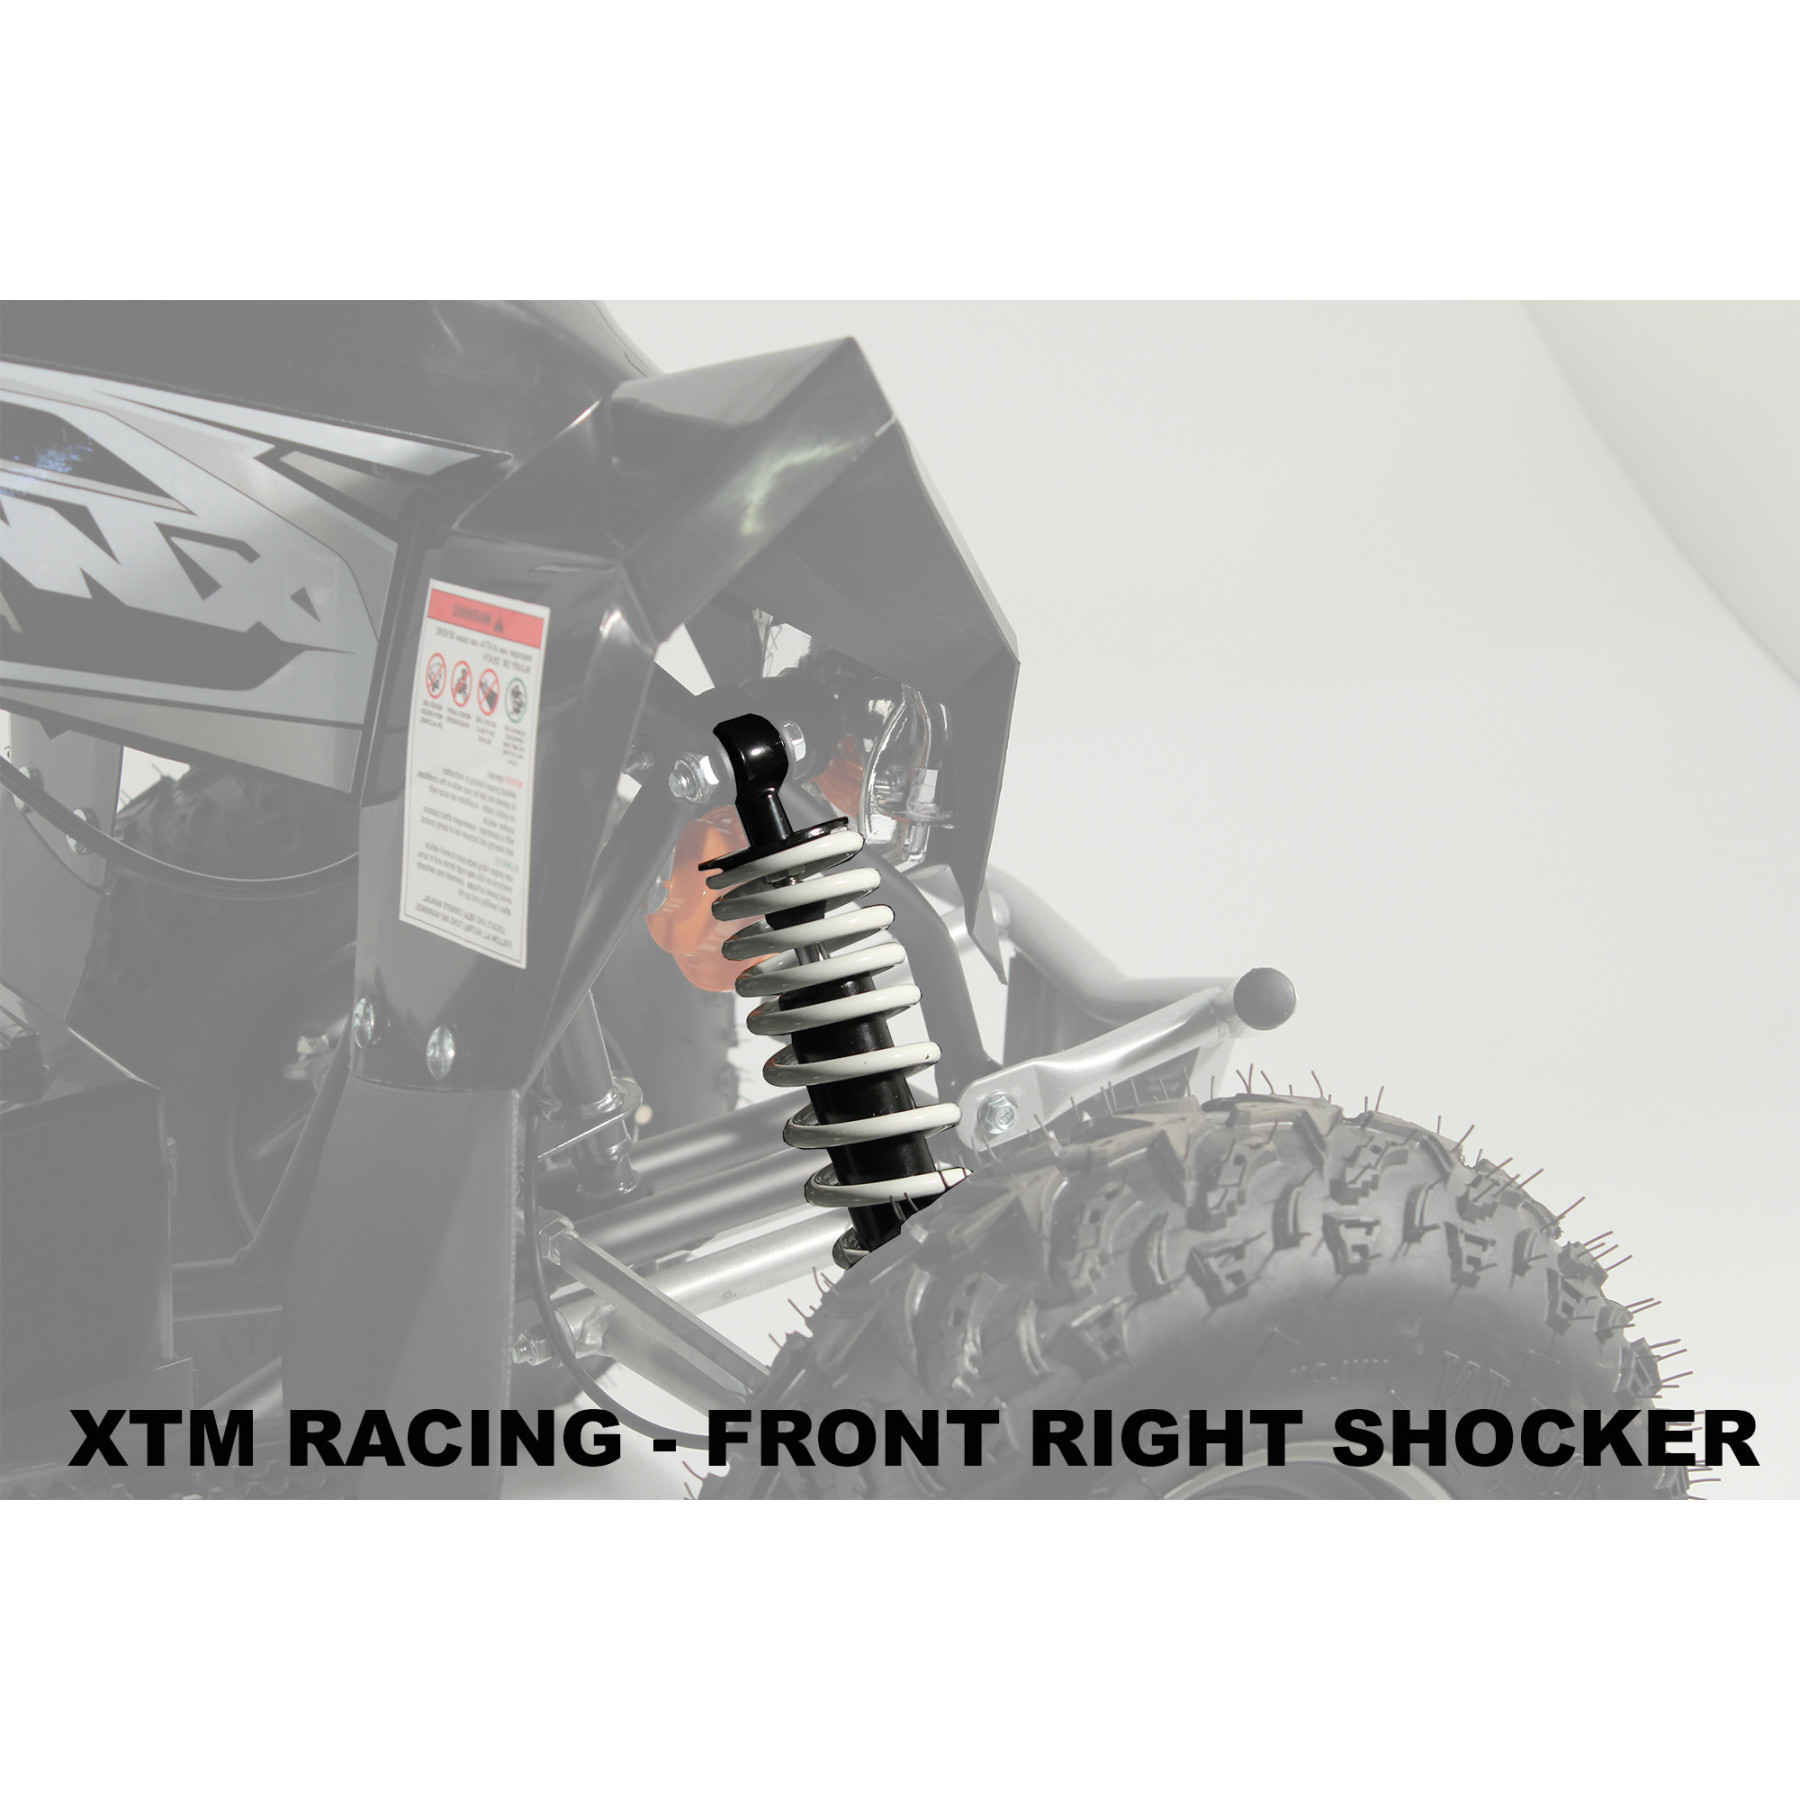 XTM RACING QUAD COMPLETE OFF SIDE FRONT RIGHT SHOCKER